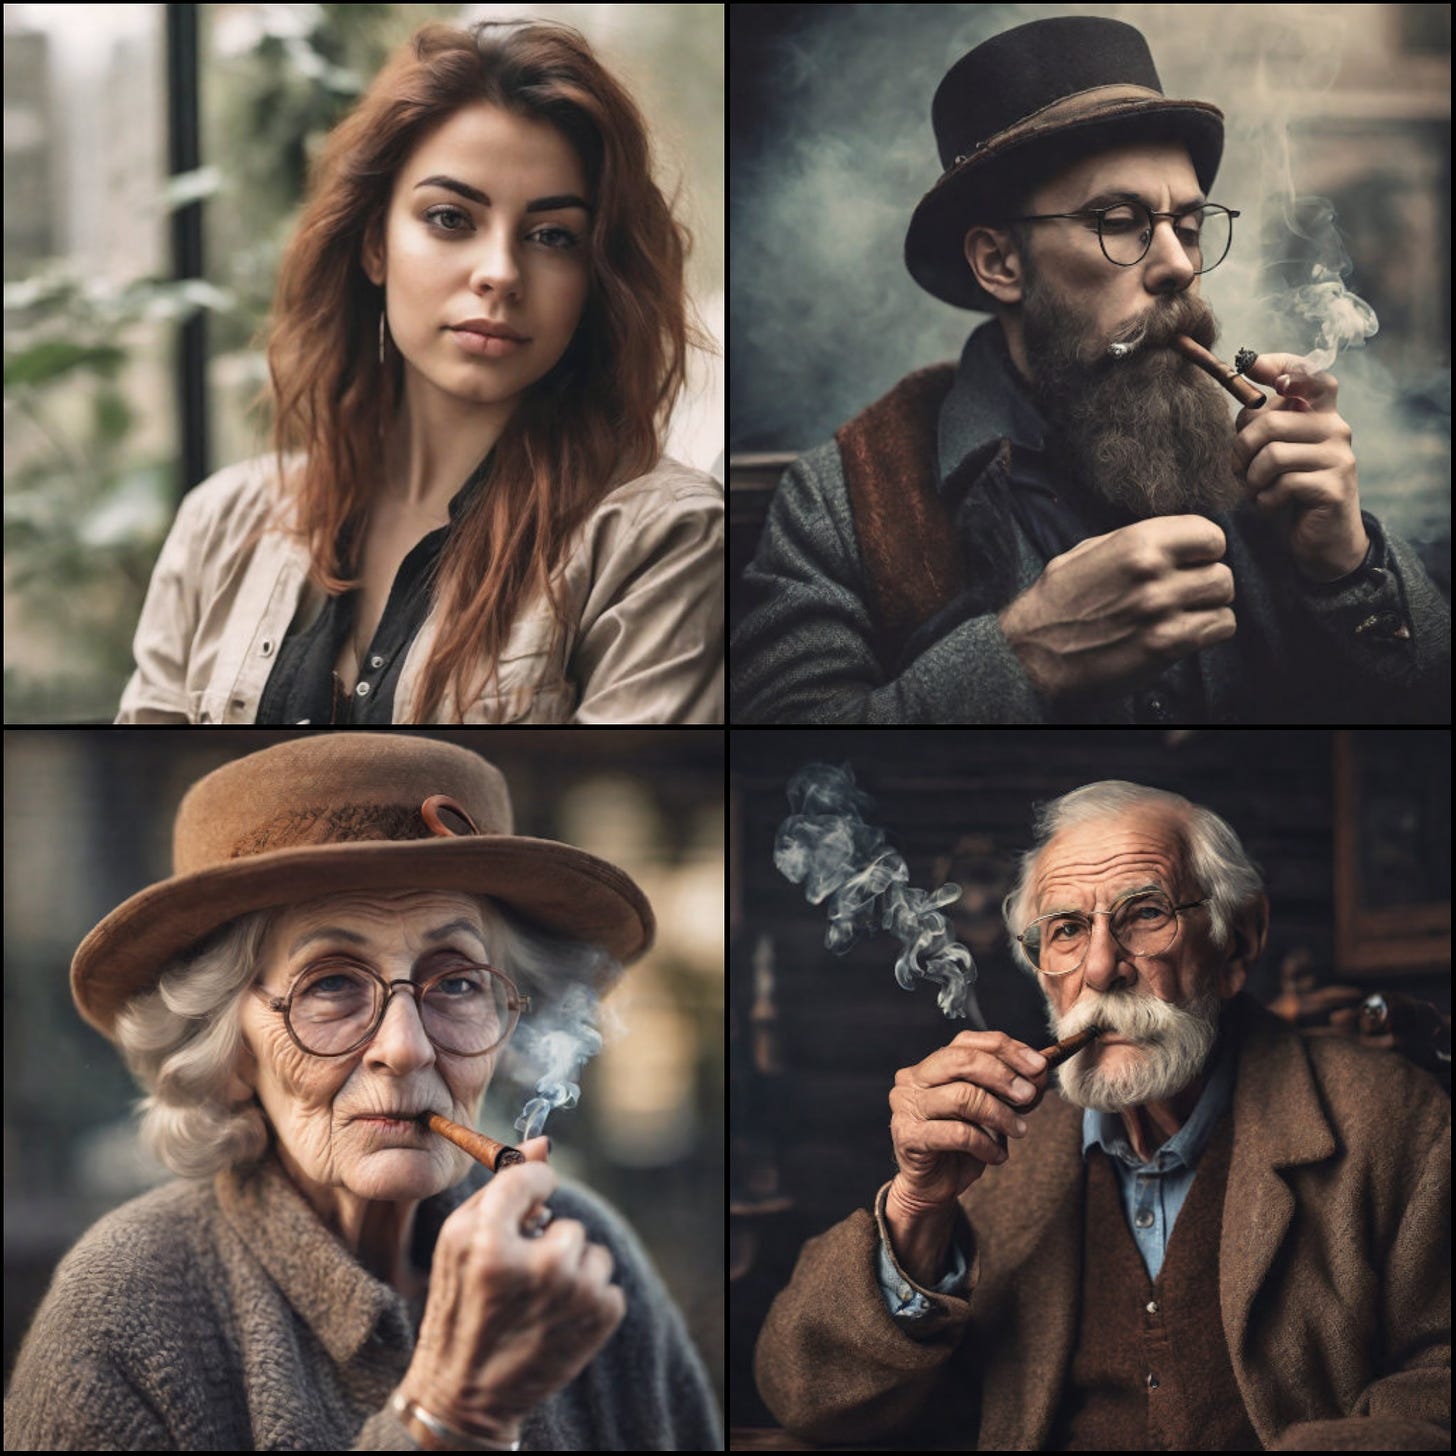 (1) A young and apparently contemporary woman, in casual dress and a casual pose; (2)a young bearded man, in glasses and a rustic hat and vest, smoking what looks like a cheroot; (3) a white-haired, eyeglassed, bearded gentleman in a tweed jacket, smoking what might or might not be a pipe; and (4) an elderly, wise-looking woman in glasses and comfortable brown hat and clothing, also smoking something alleged -- unconvincingly -- to be a pipe.